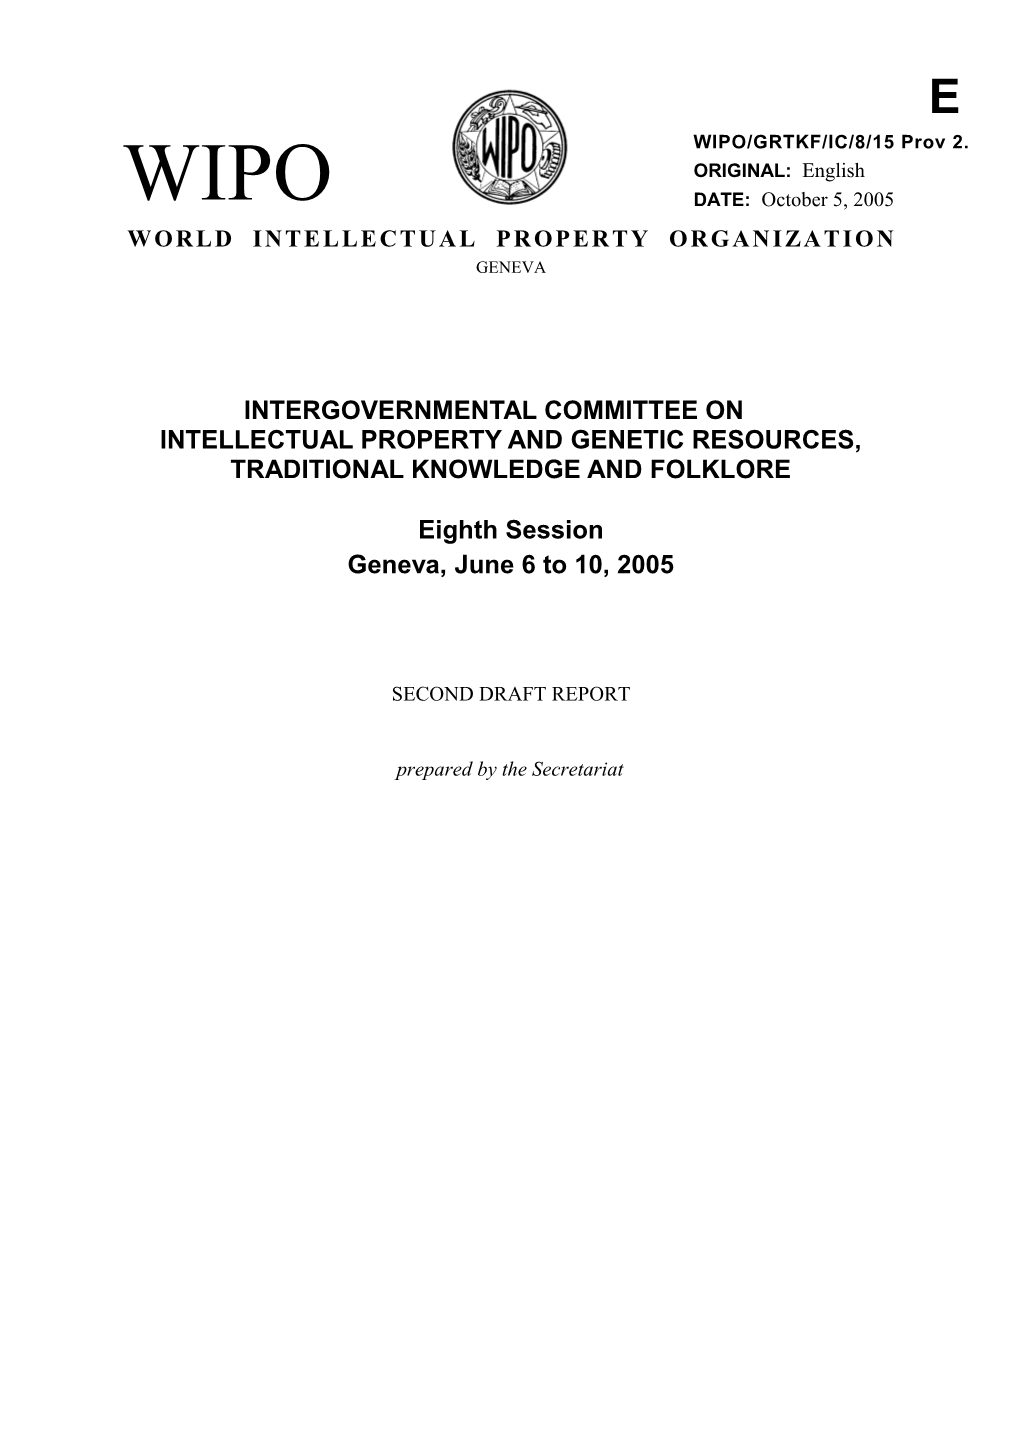 WIPO/GRTKF/IC/8/15 PROV.2: Second Draft Report